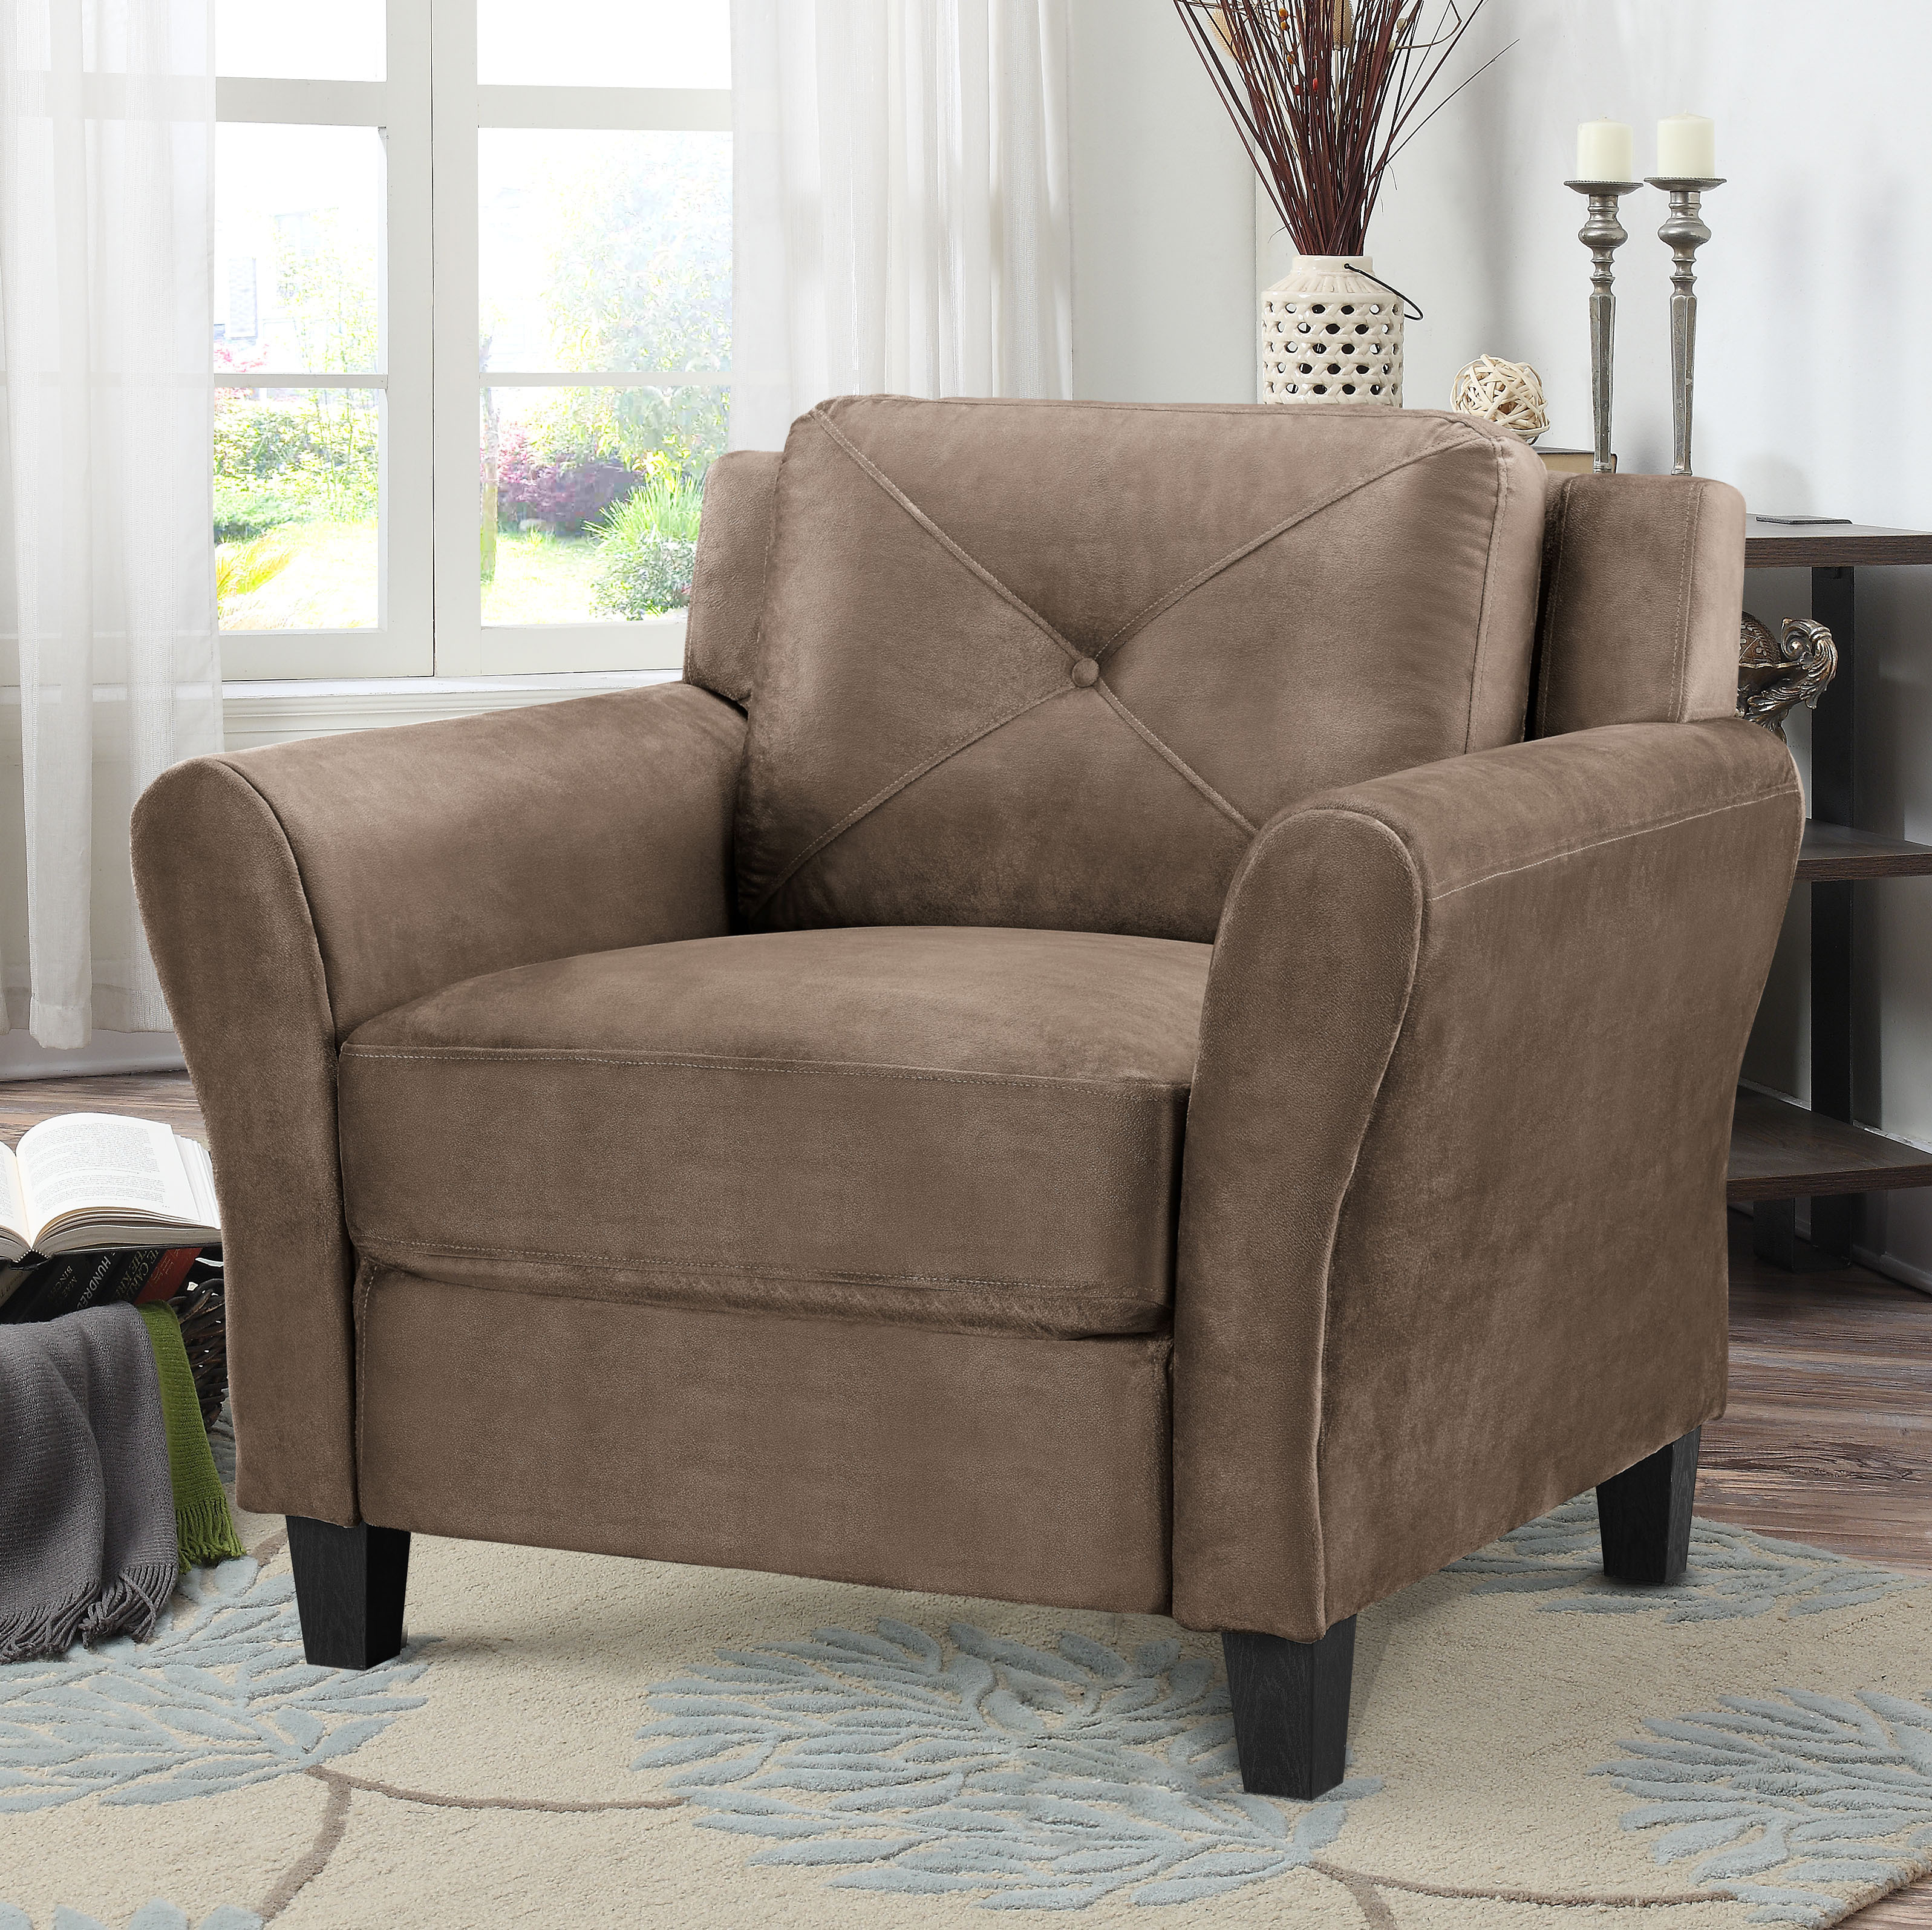 Lifestyle Solutions Taryn Lounge Chair with Rolled Arms, Brown Polyester Fabric - image 3 of 16